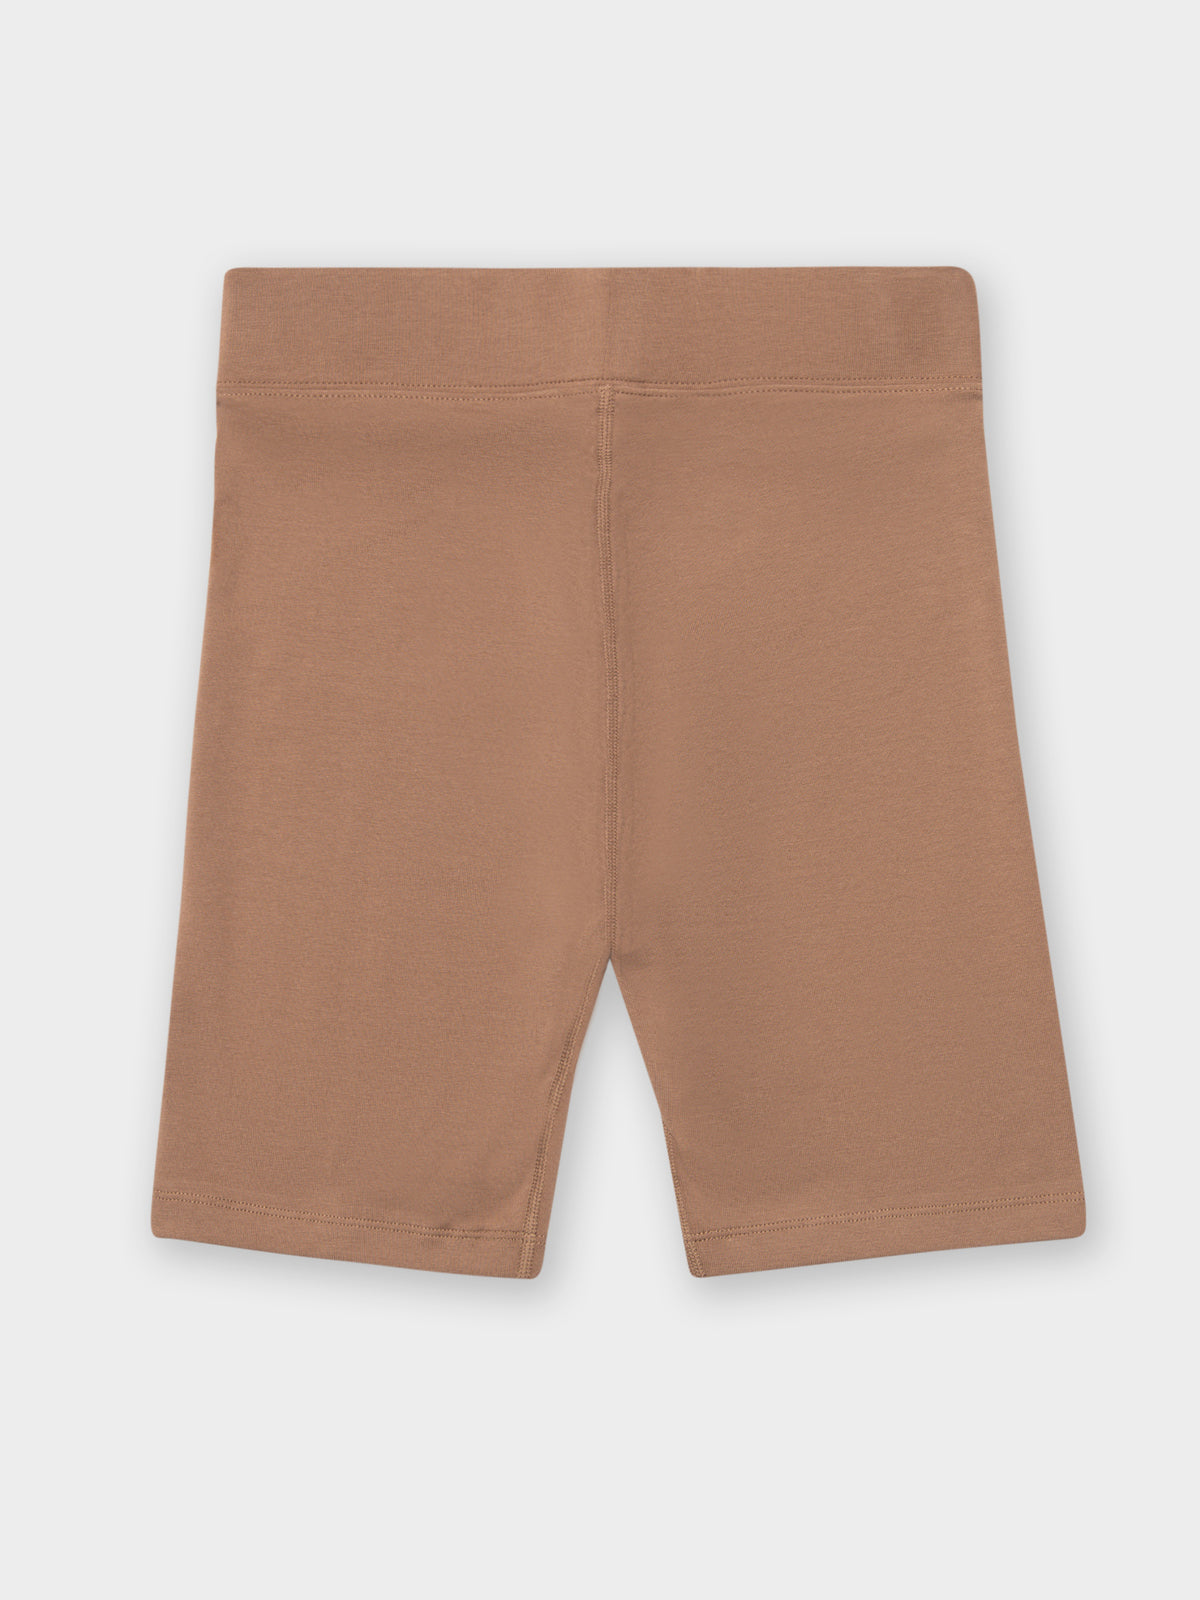 Essential Bike Shorts in Archaeo Brown